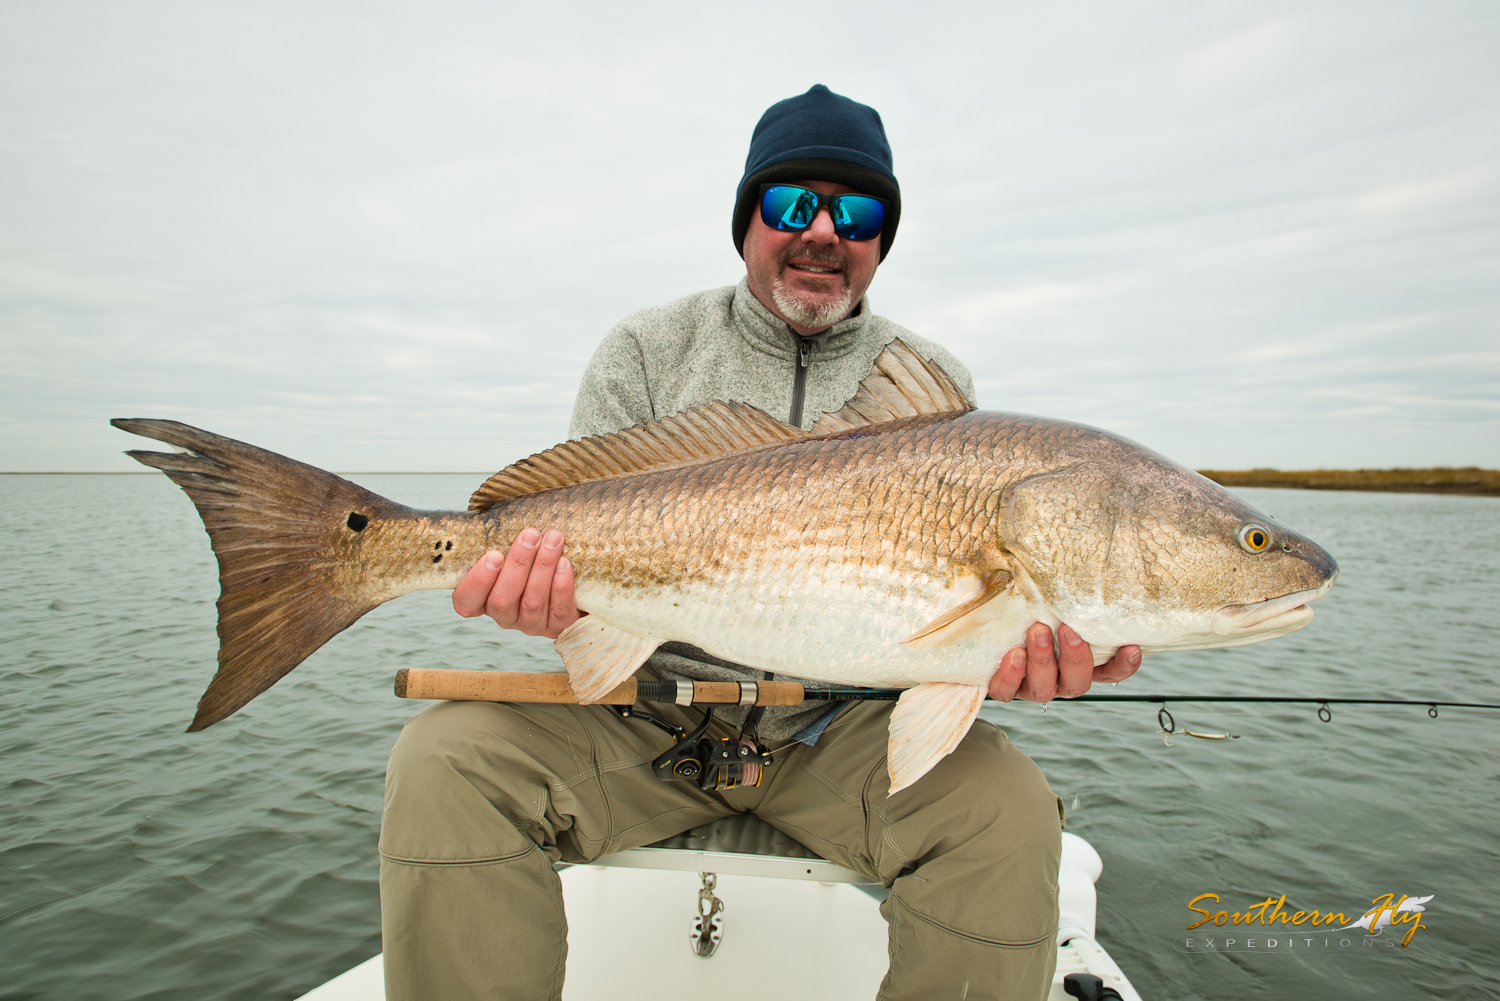 Sight Fishing Vacation in Shallow waters near Delacroix La with Southern Fly Expeditions 